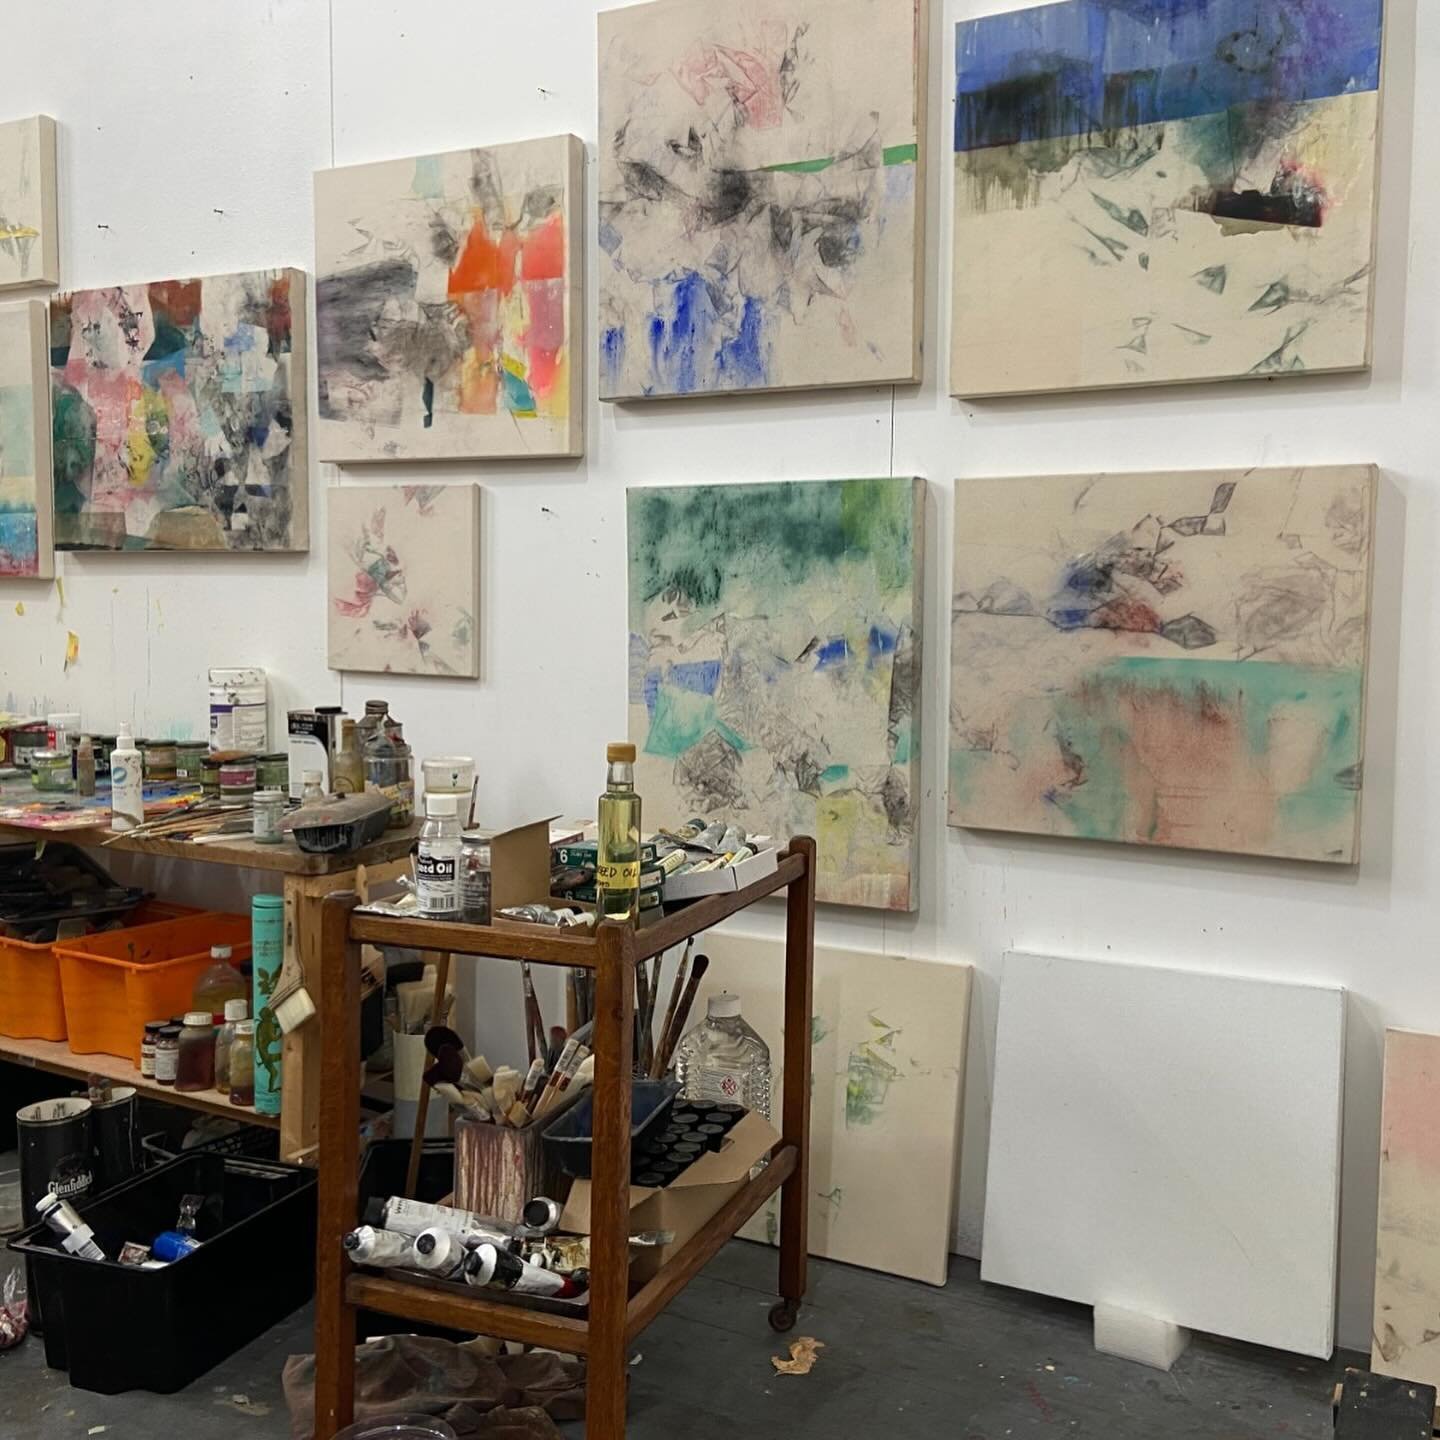 Here&rsquo;s a sneak peek of what to expect in this summer&rsquo;s open studios 👀 we&rsquo;ll be highlighting what&rsquo;s happening during this year&rsquo;s festival over the next few weeks, we can&rsquo;t wait to see you there 
.
.
.
#camberwellar